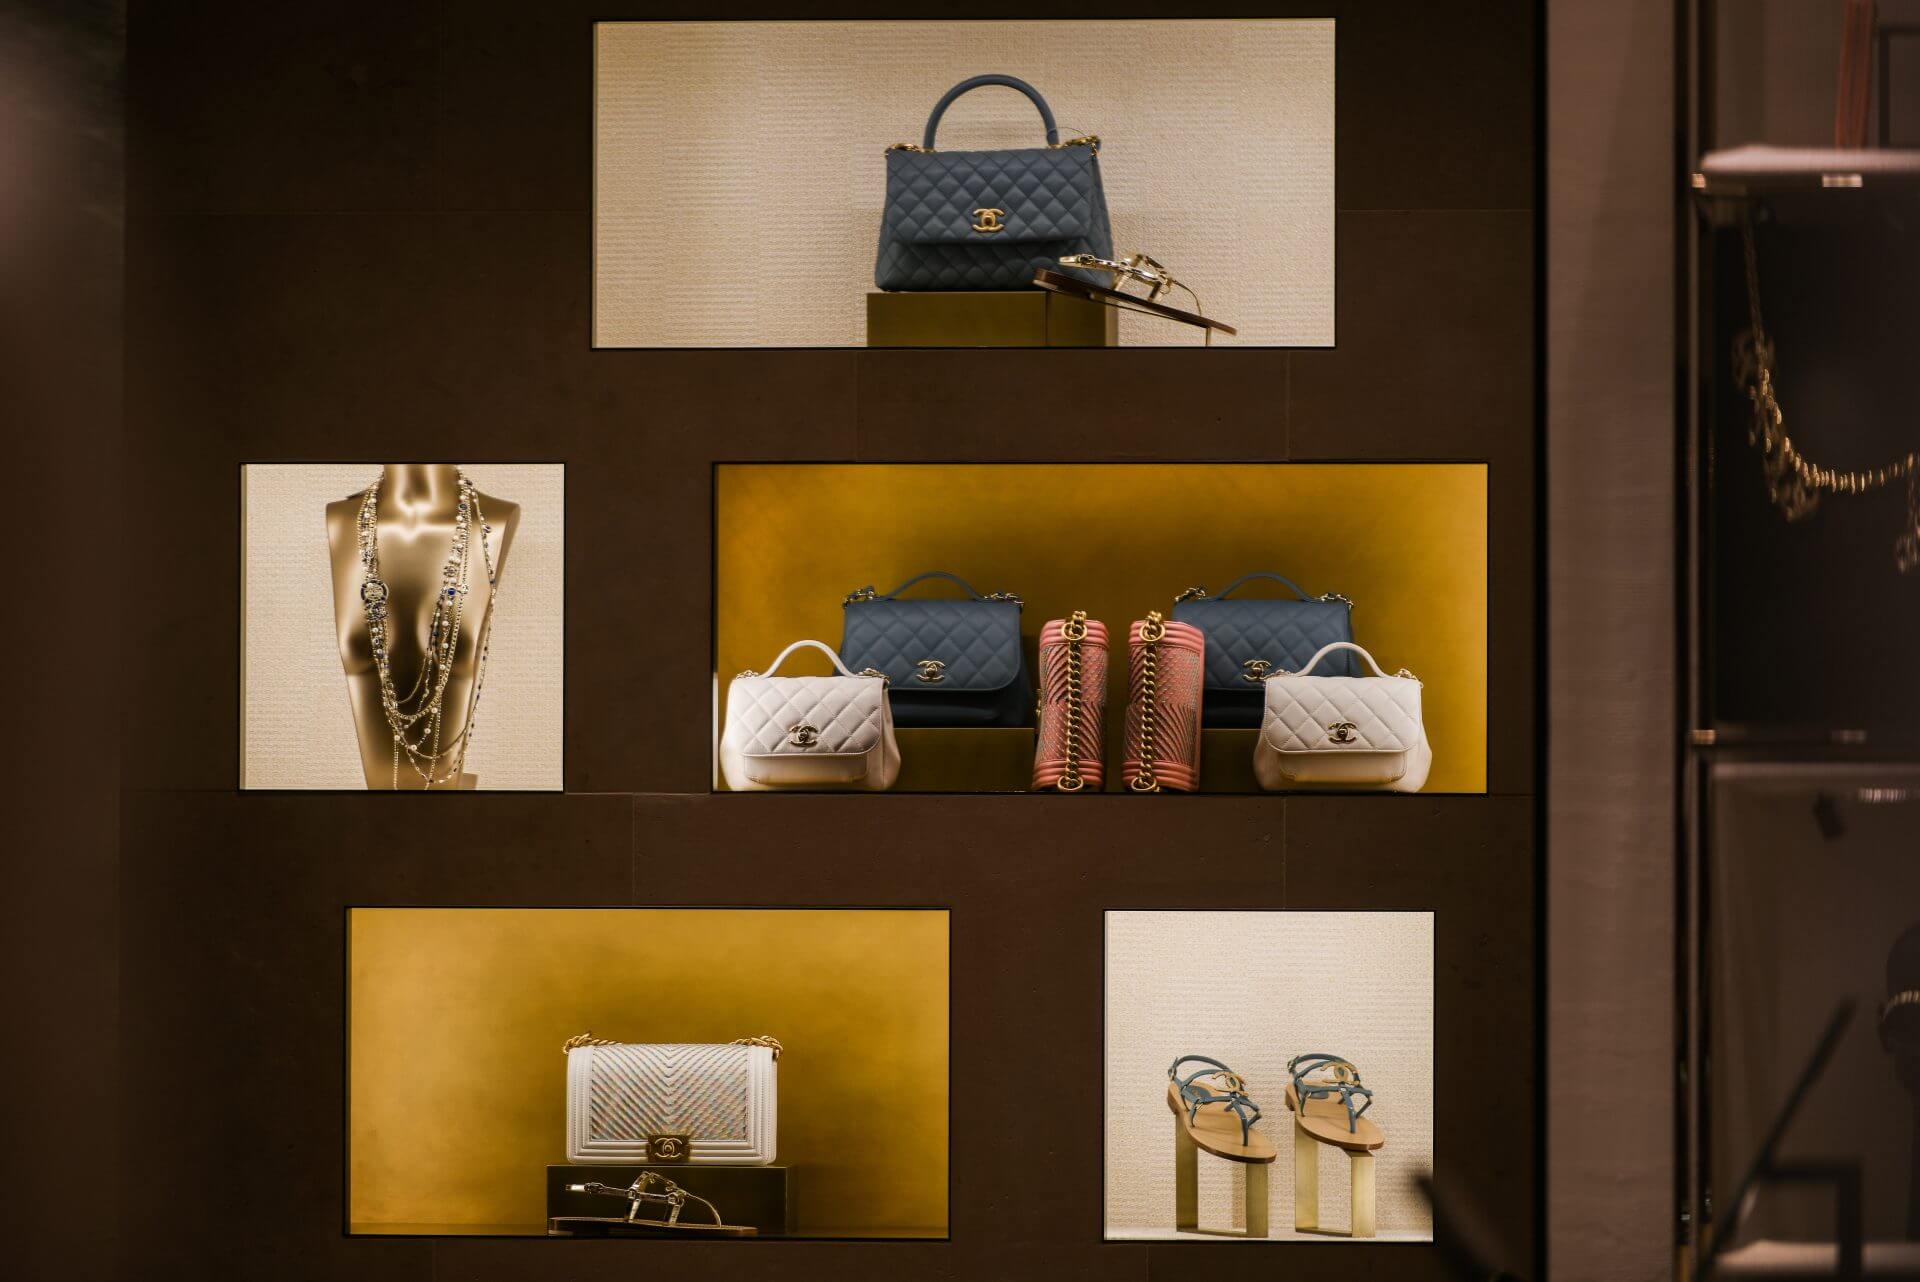 Louis Vuitton, Fendi, and Bentley show the multifaceted benefits